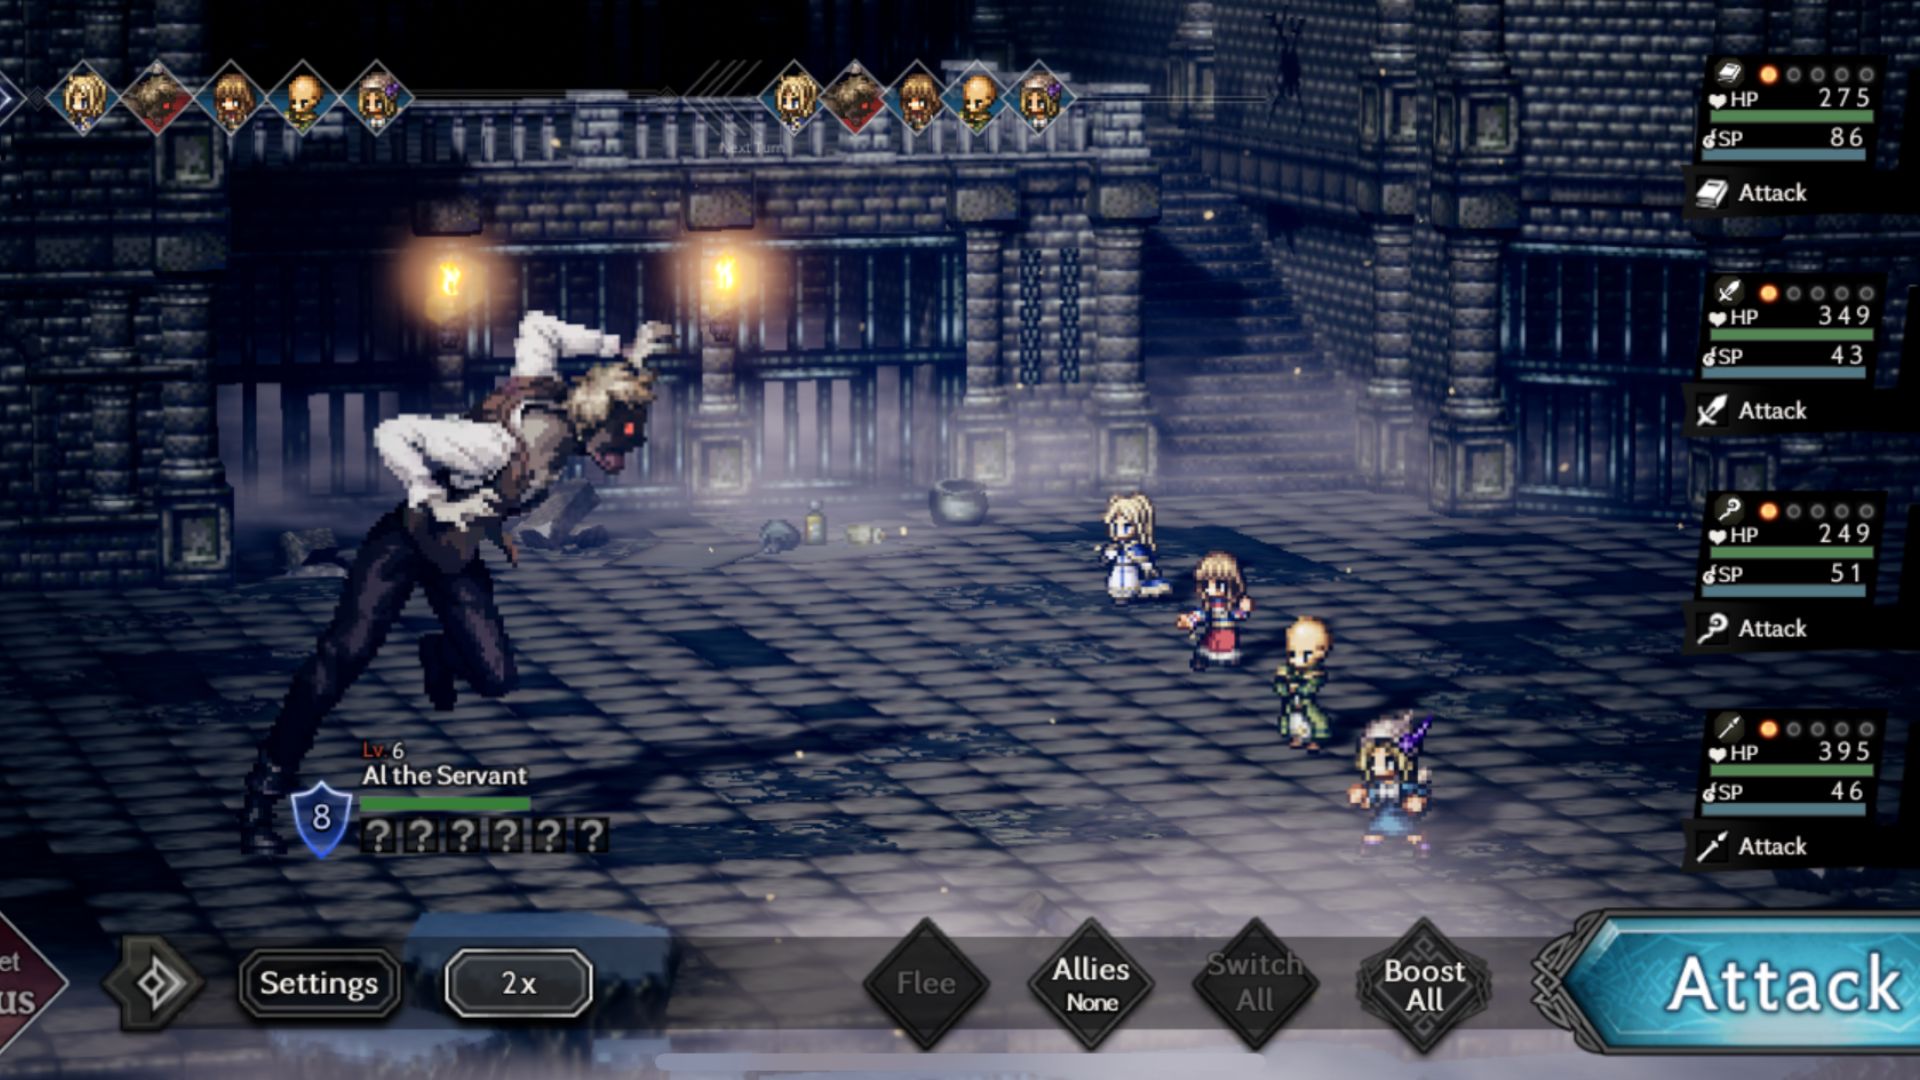 Octopath Traveler: Champions of the Continent Hands-On Impressions